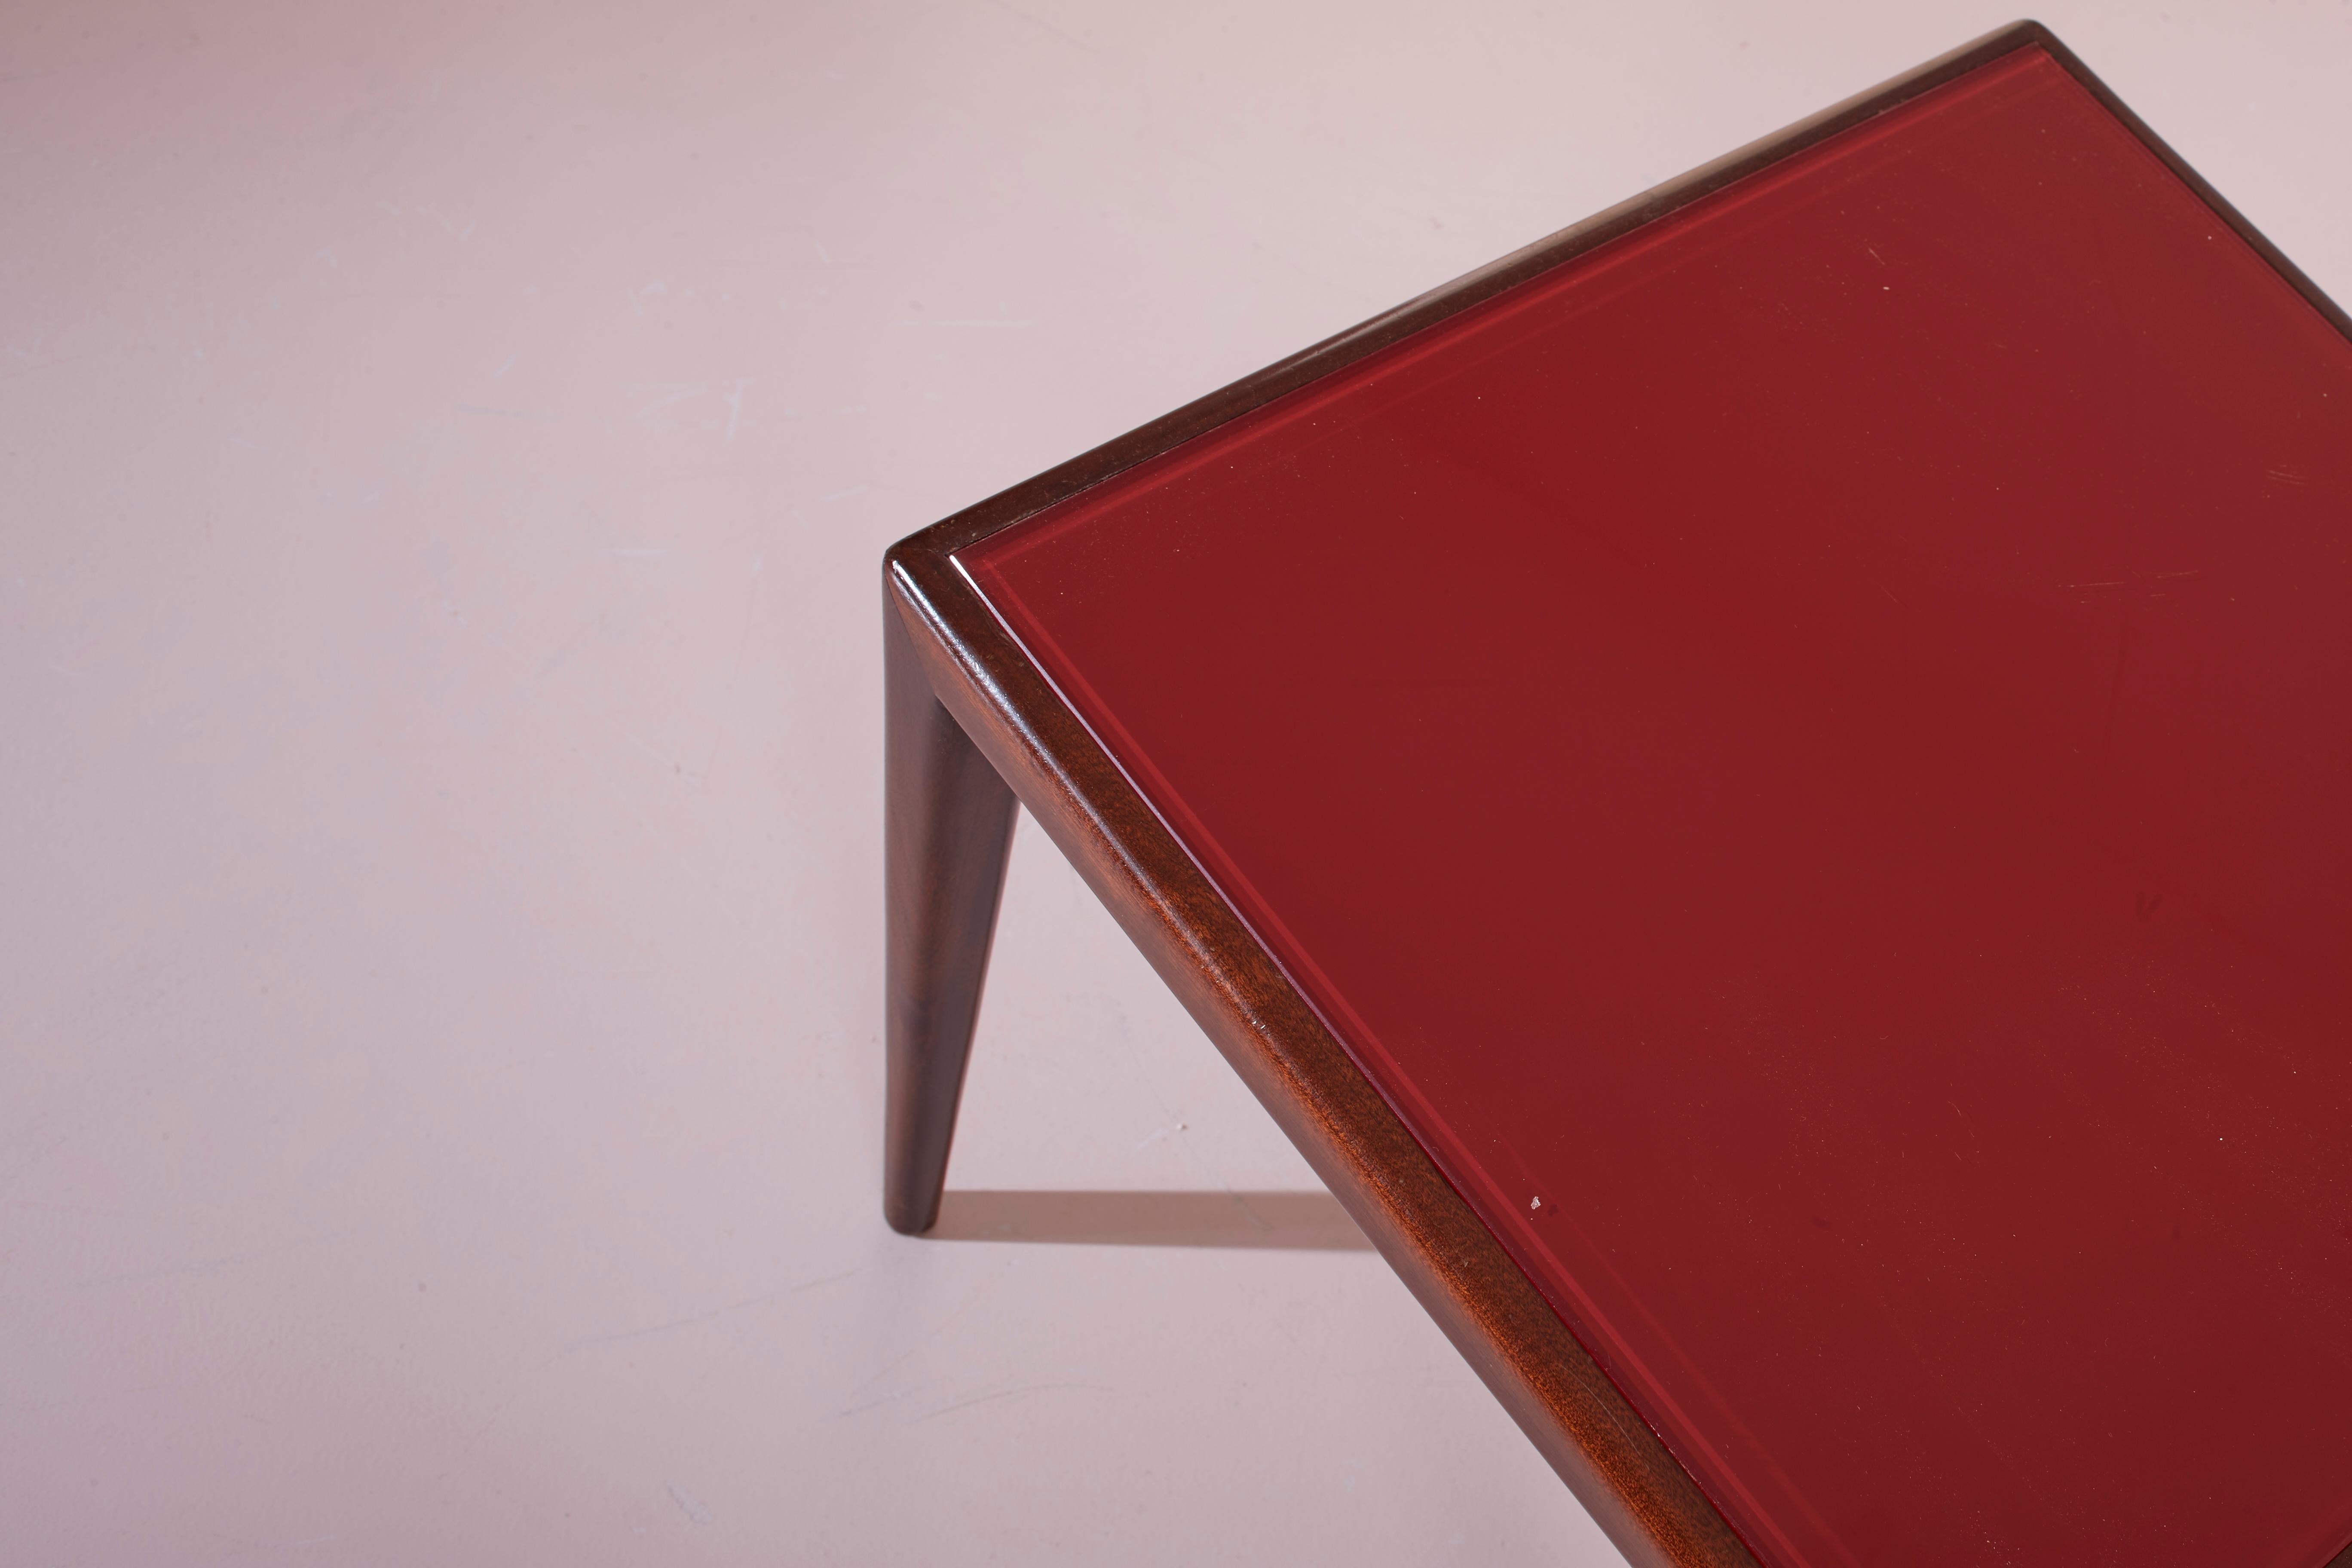 Osvaldo Borsani wooden and red glass side tables with a drawer, Italy, 1950s For Sale 2